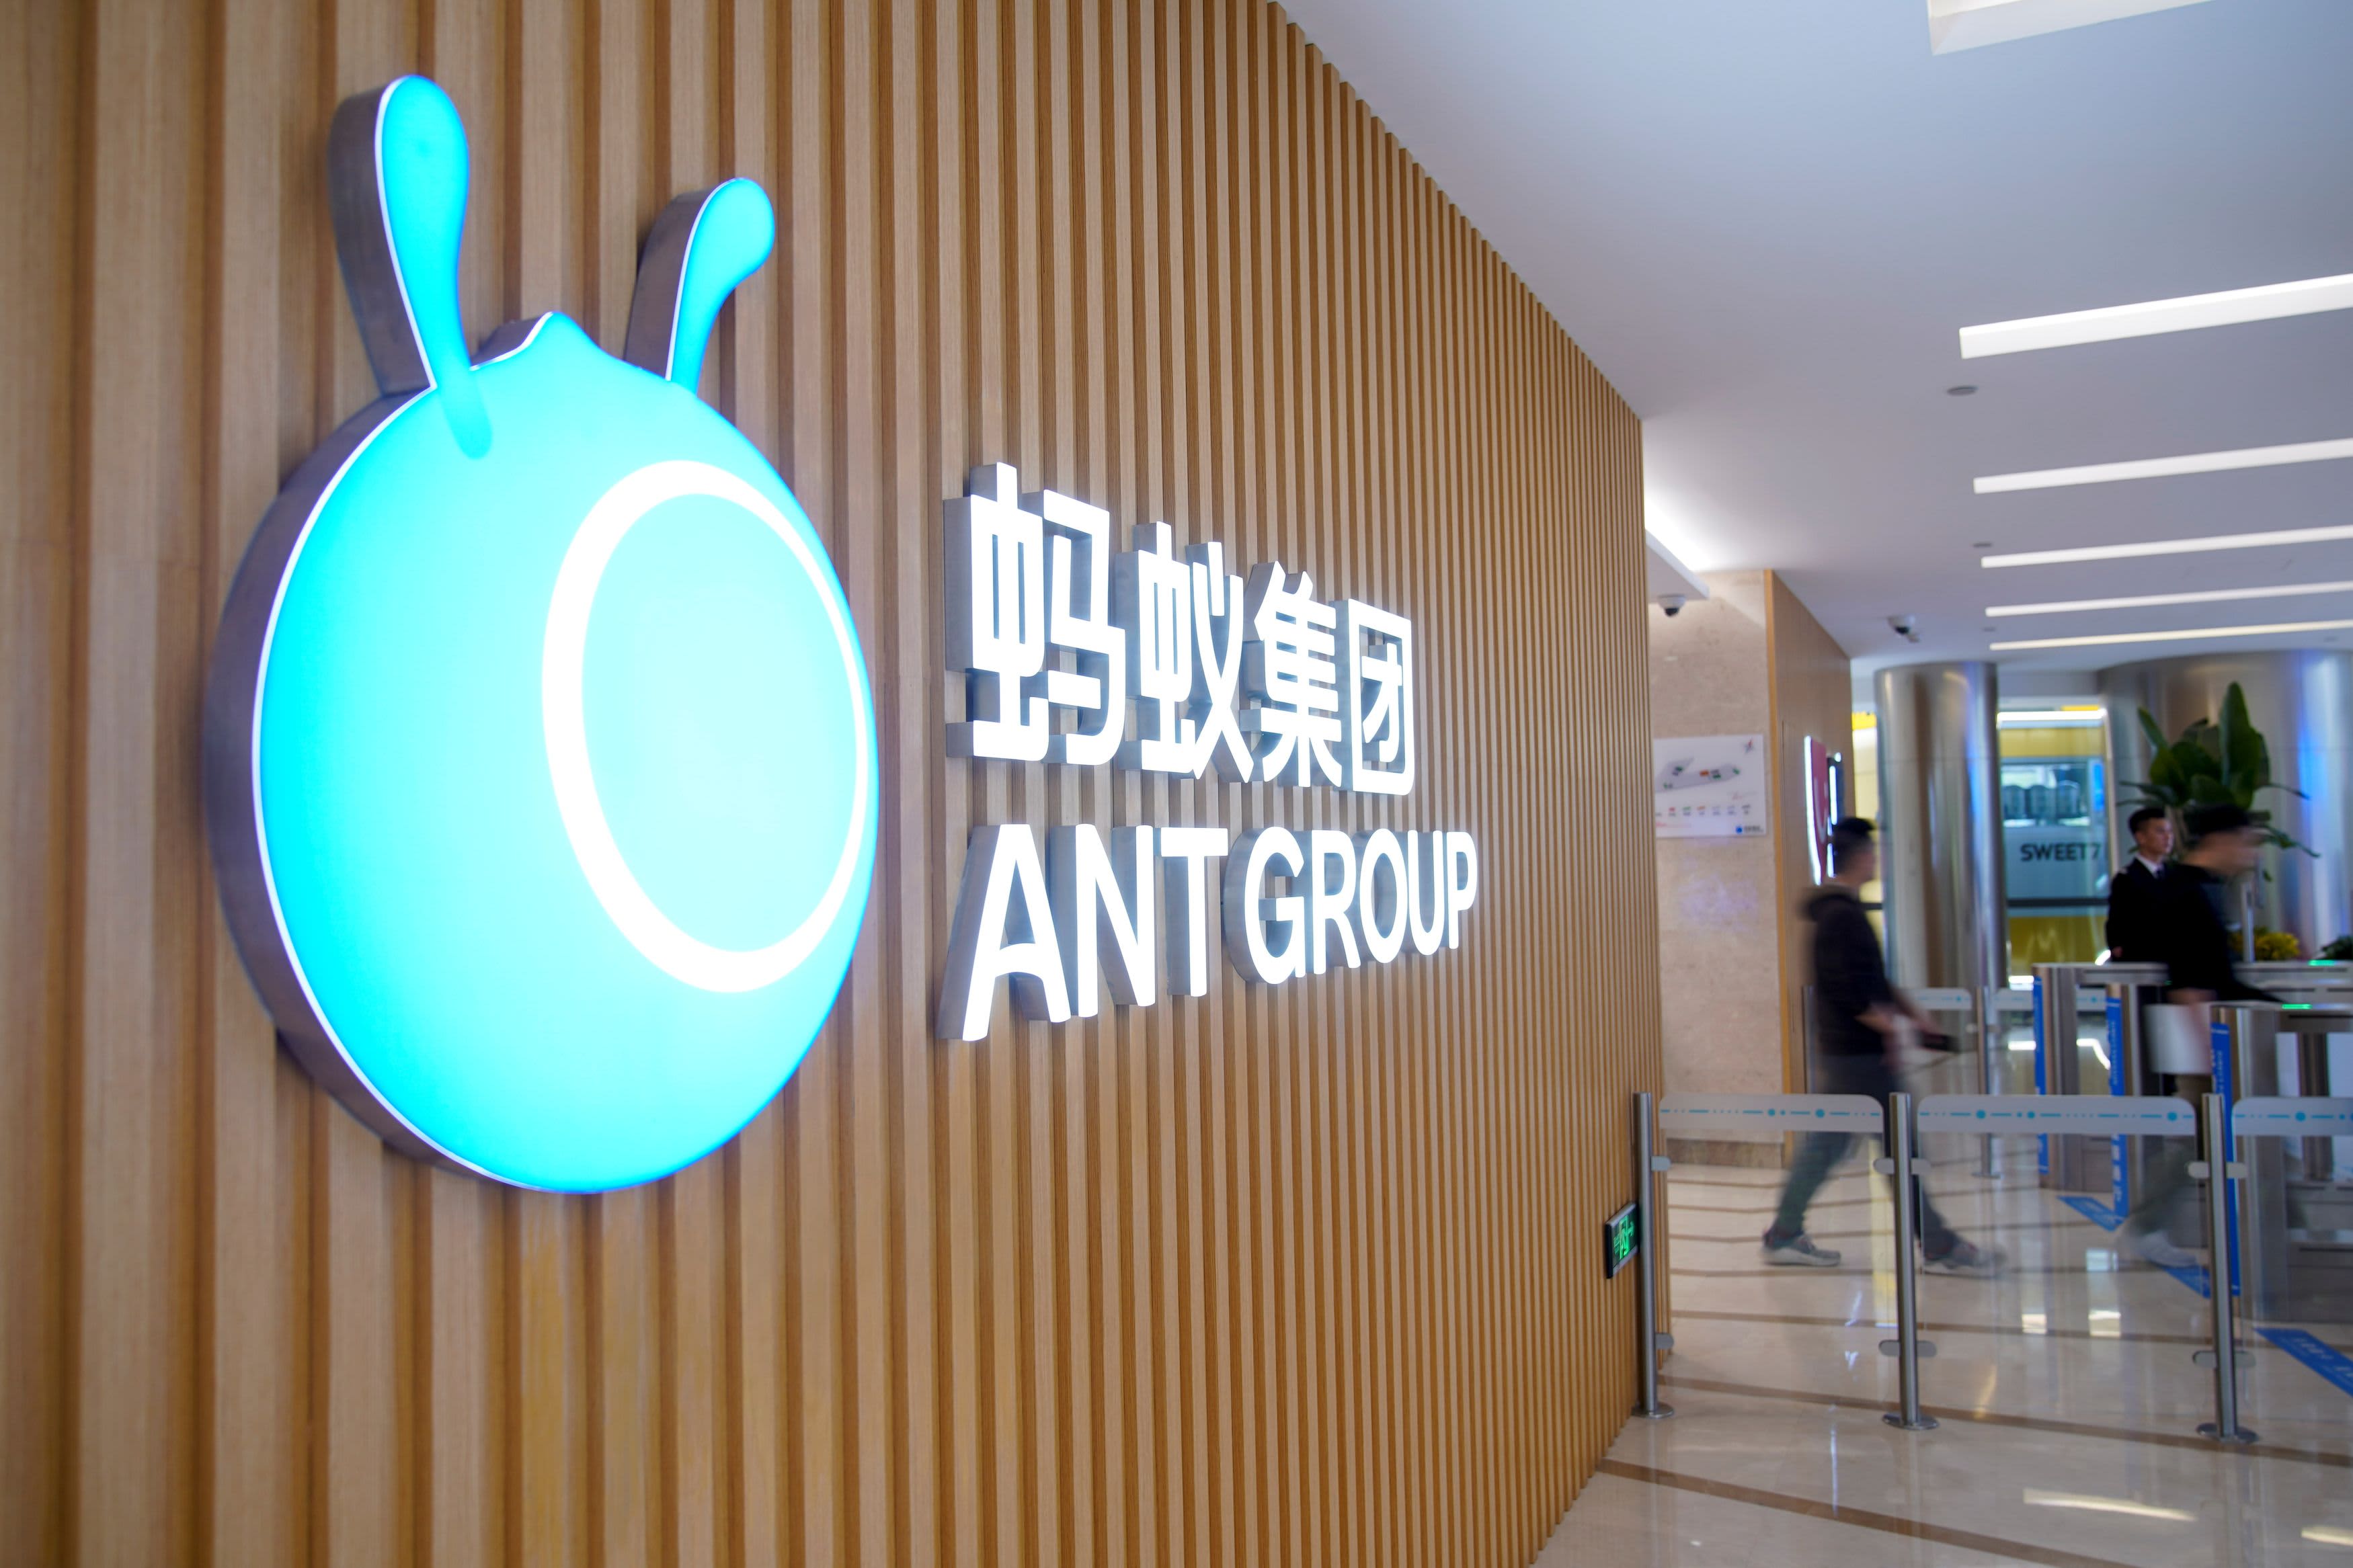 Ant Group says it will help employees earn money after being canceled